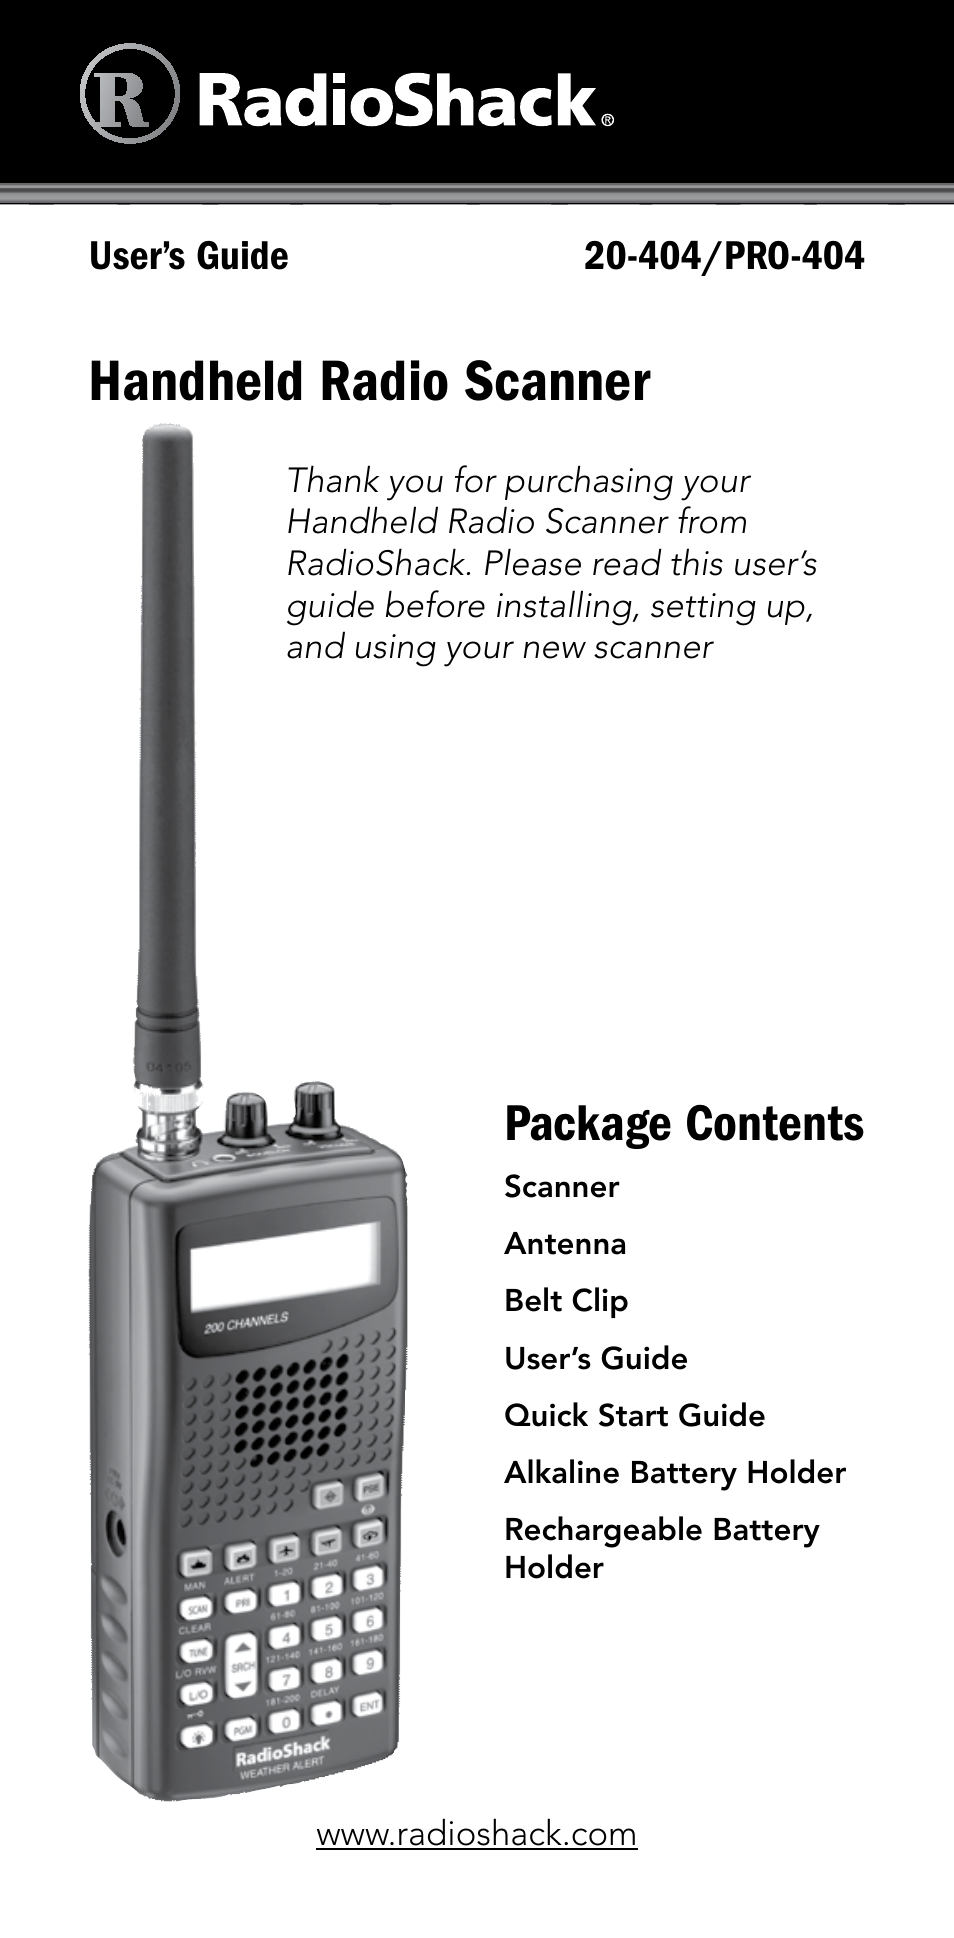 Radio Shack 20-404 User Manual | 21 pages | Also for: PRO-404